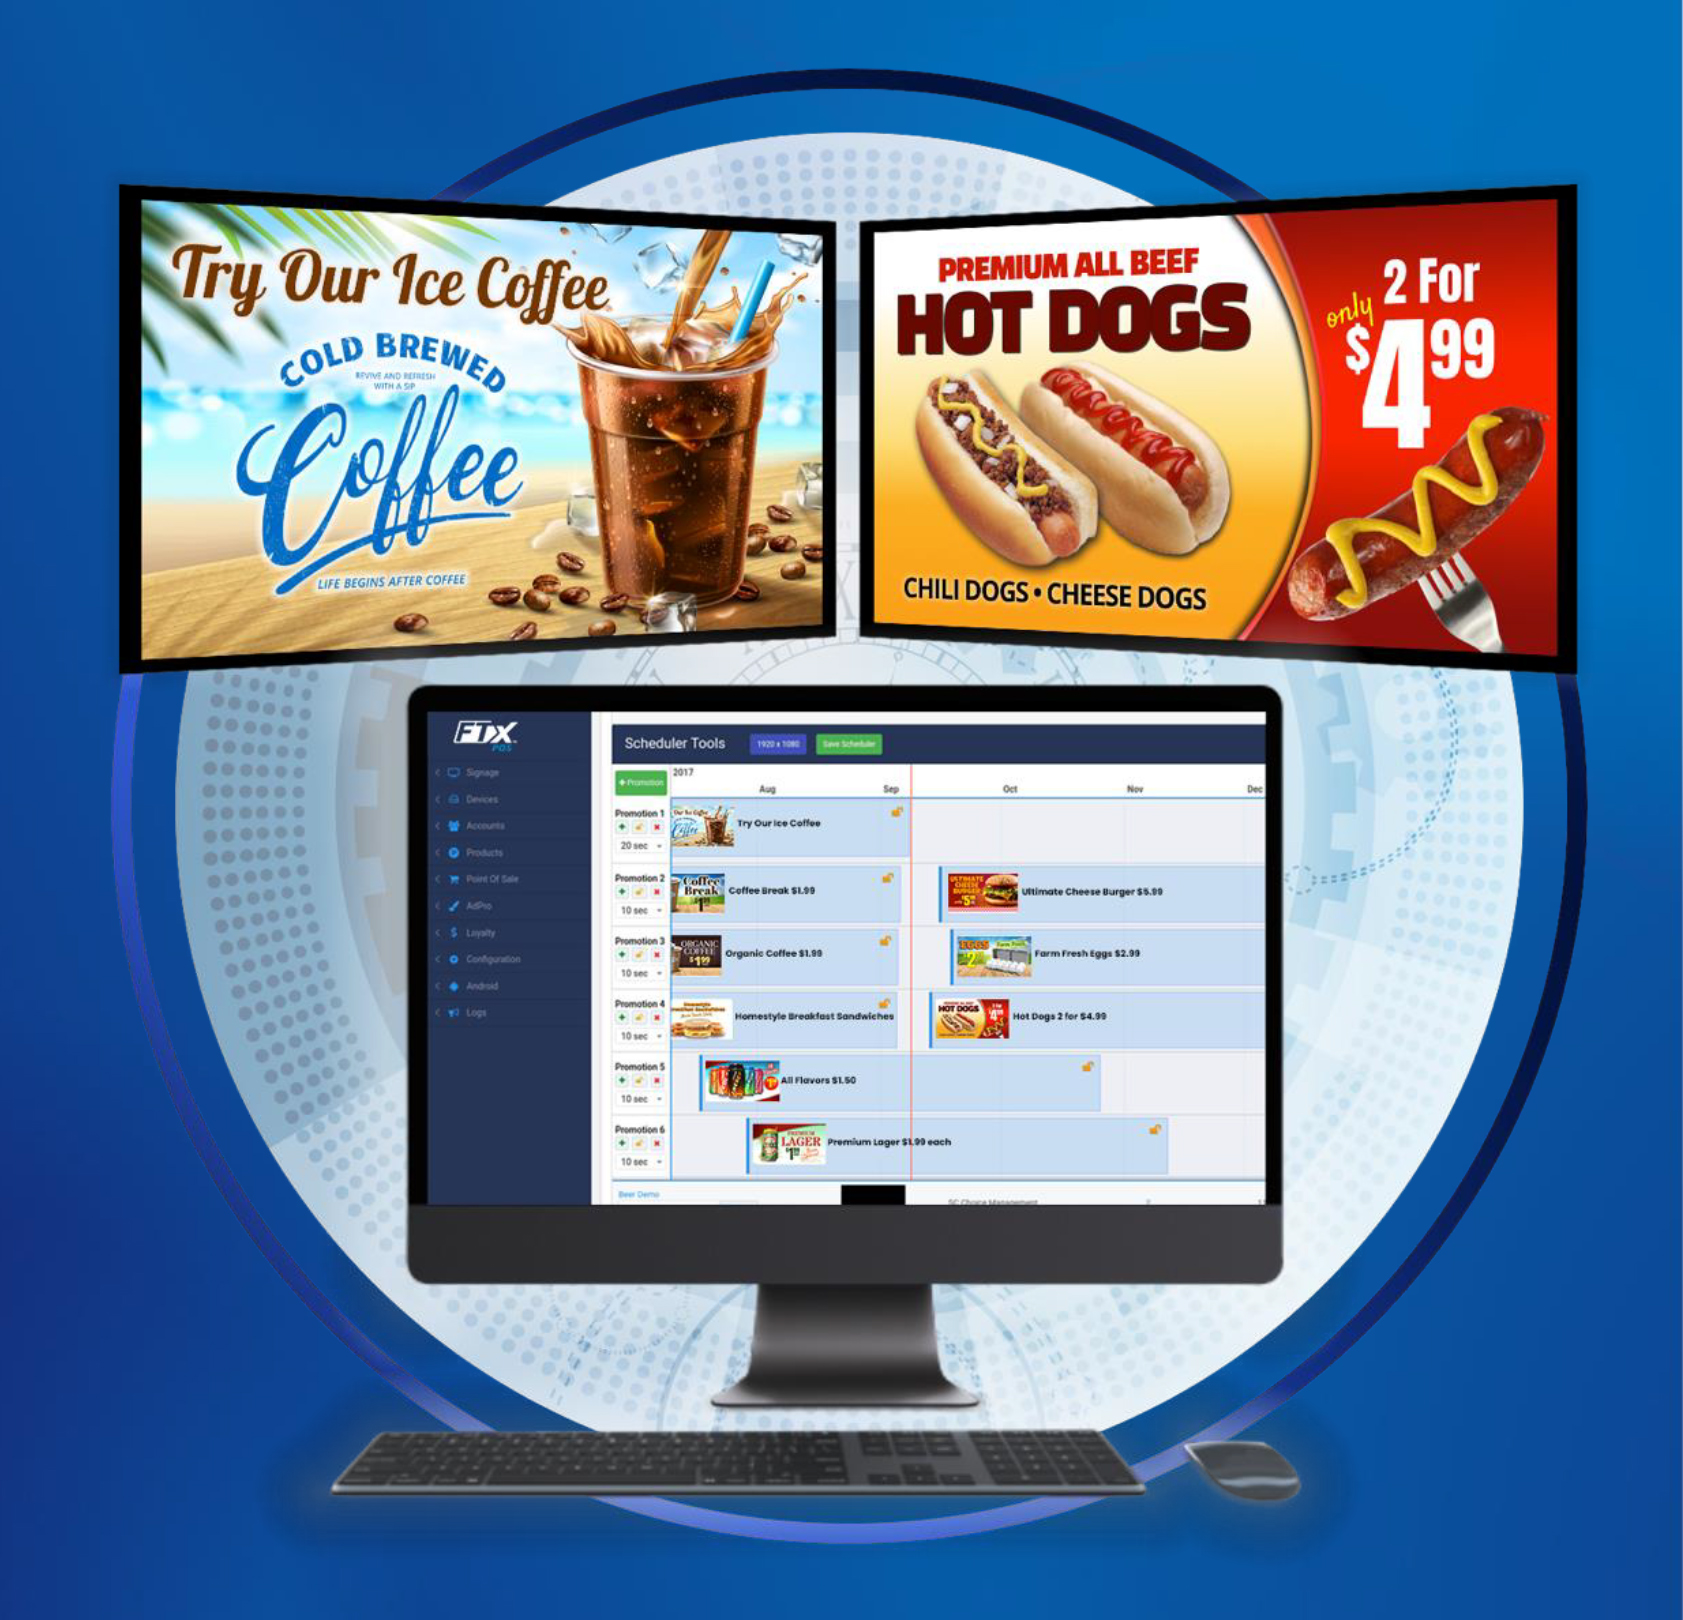 FTx Digital Signage scheduler allows managers to create rotating schedules with images, food/drink menus, and more. Deploy your designs, or use one of thousands of digital signage templates for any occasion.